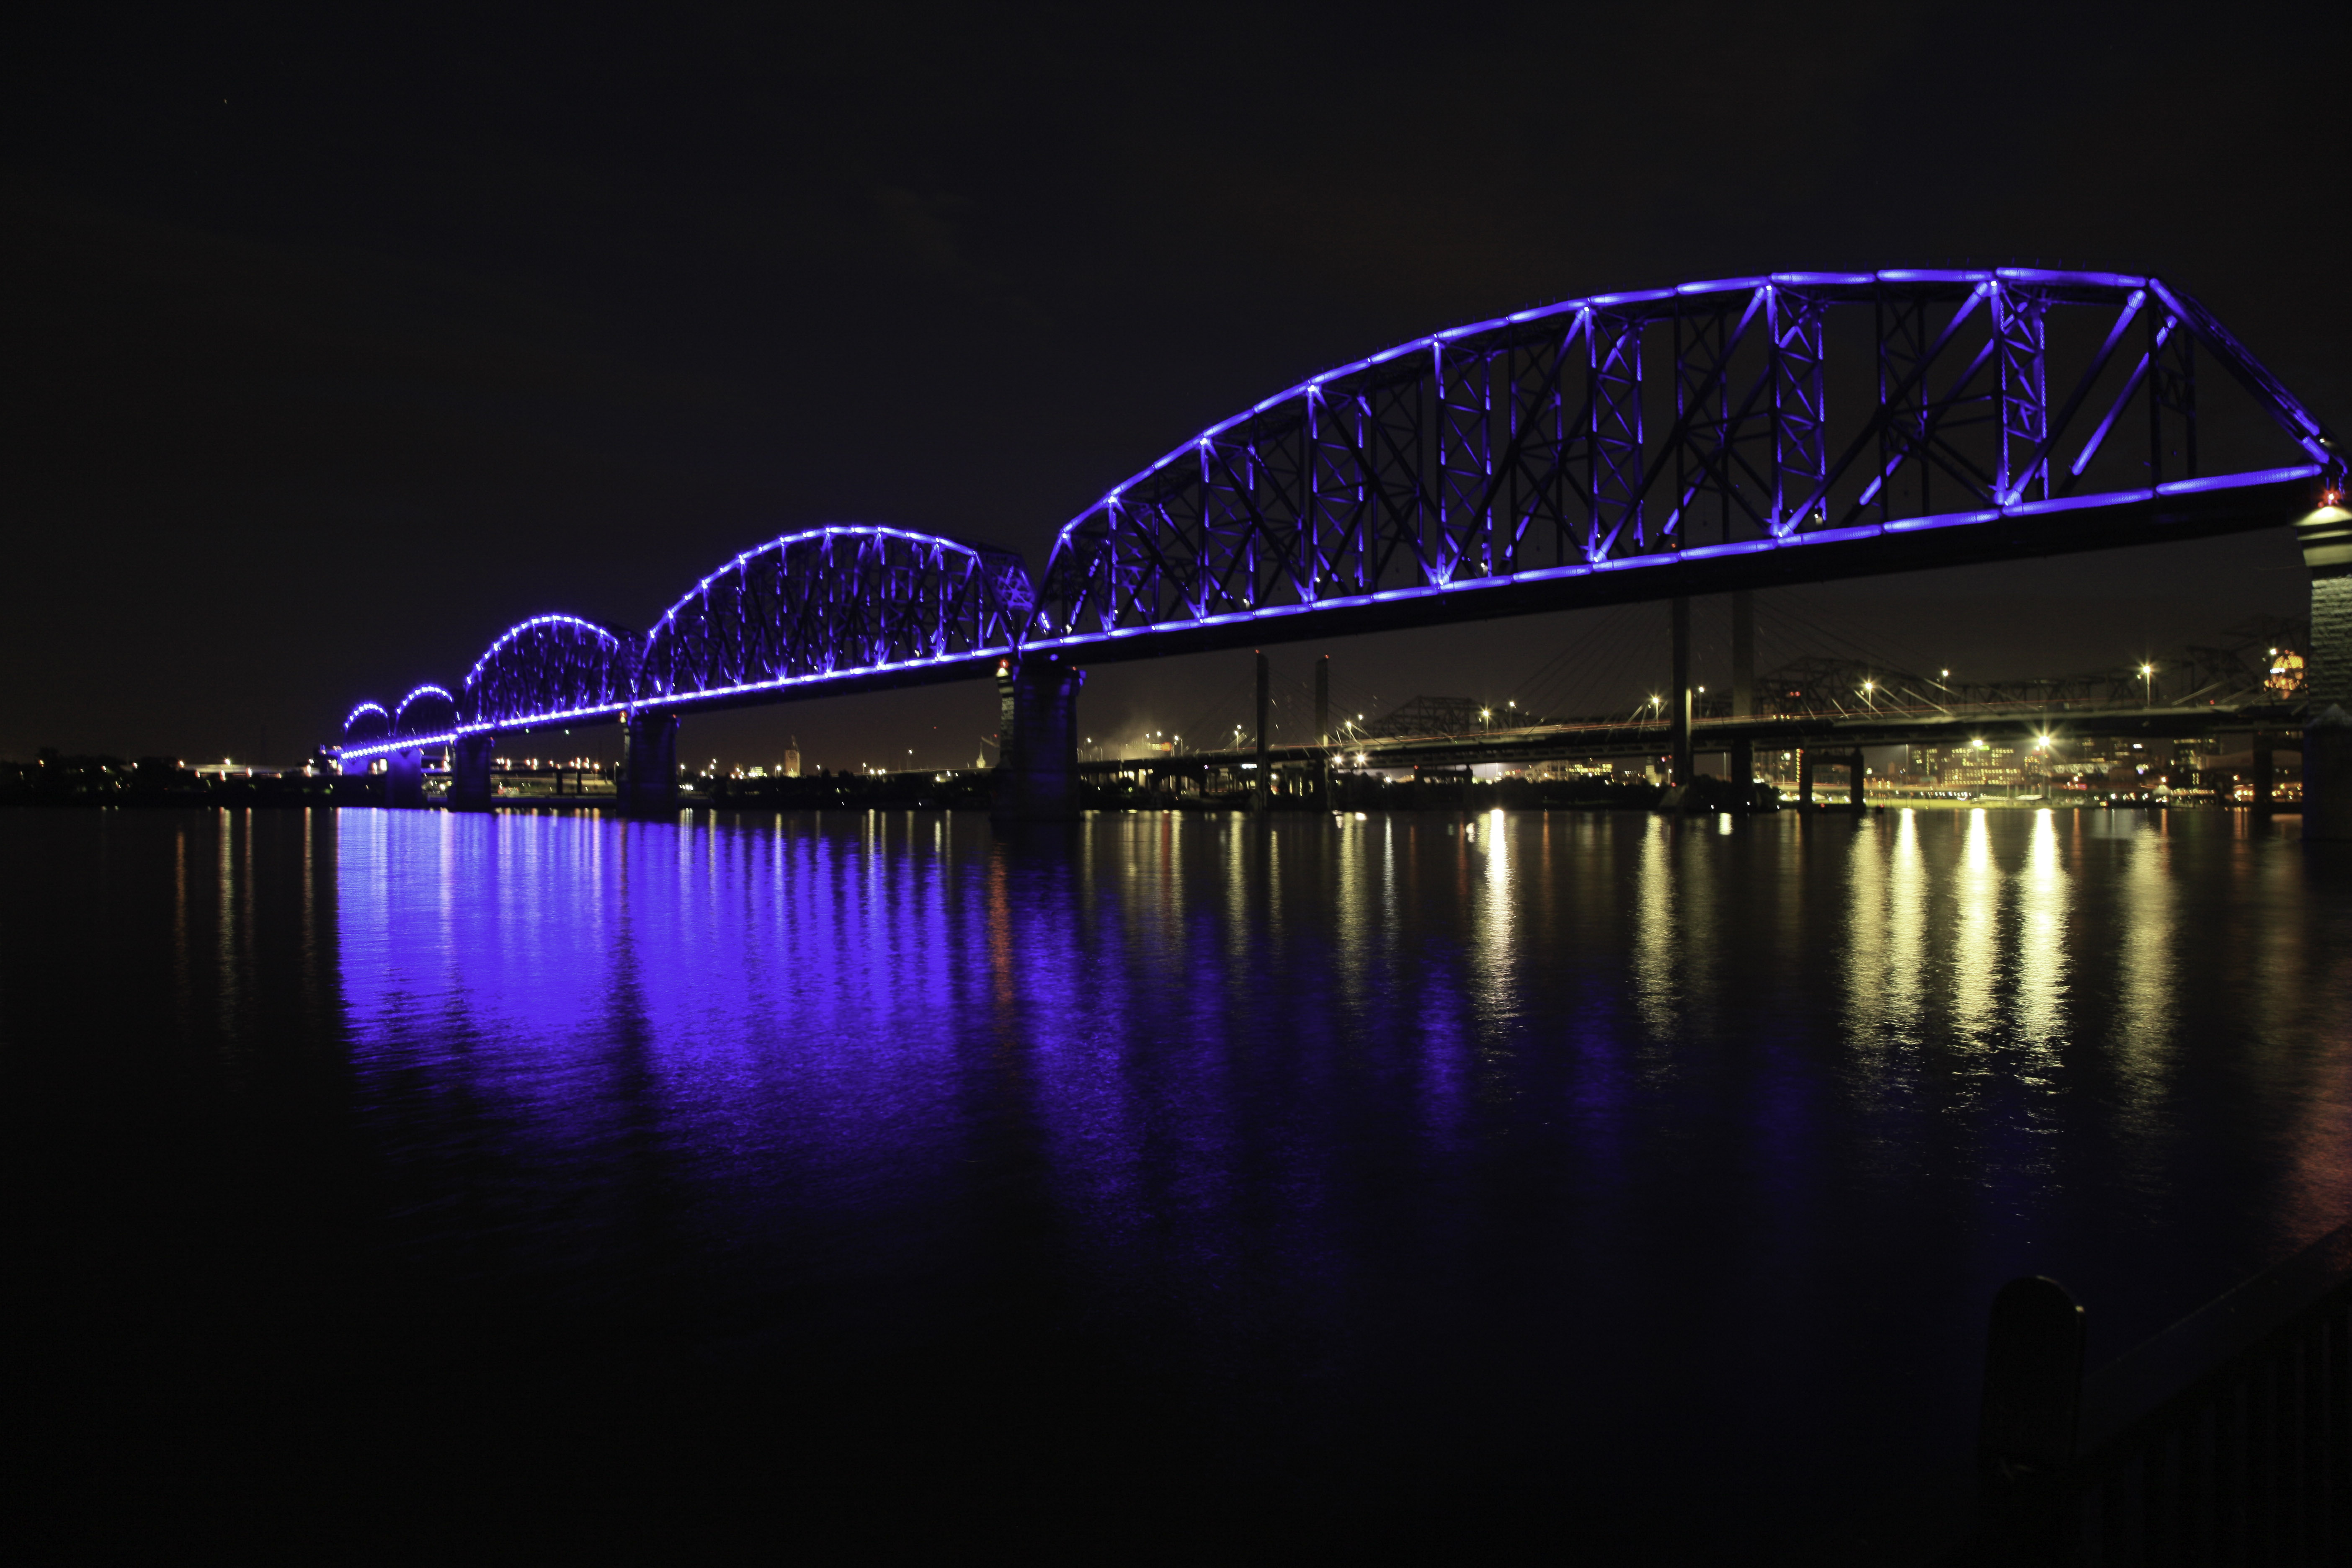 Bridge over the Water at night in Louisville, Kentucky image - Free ...